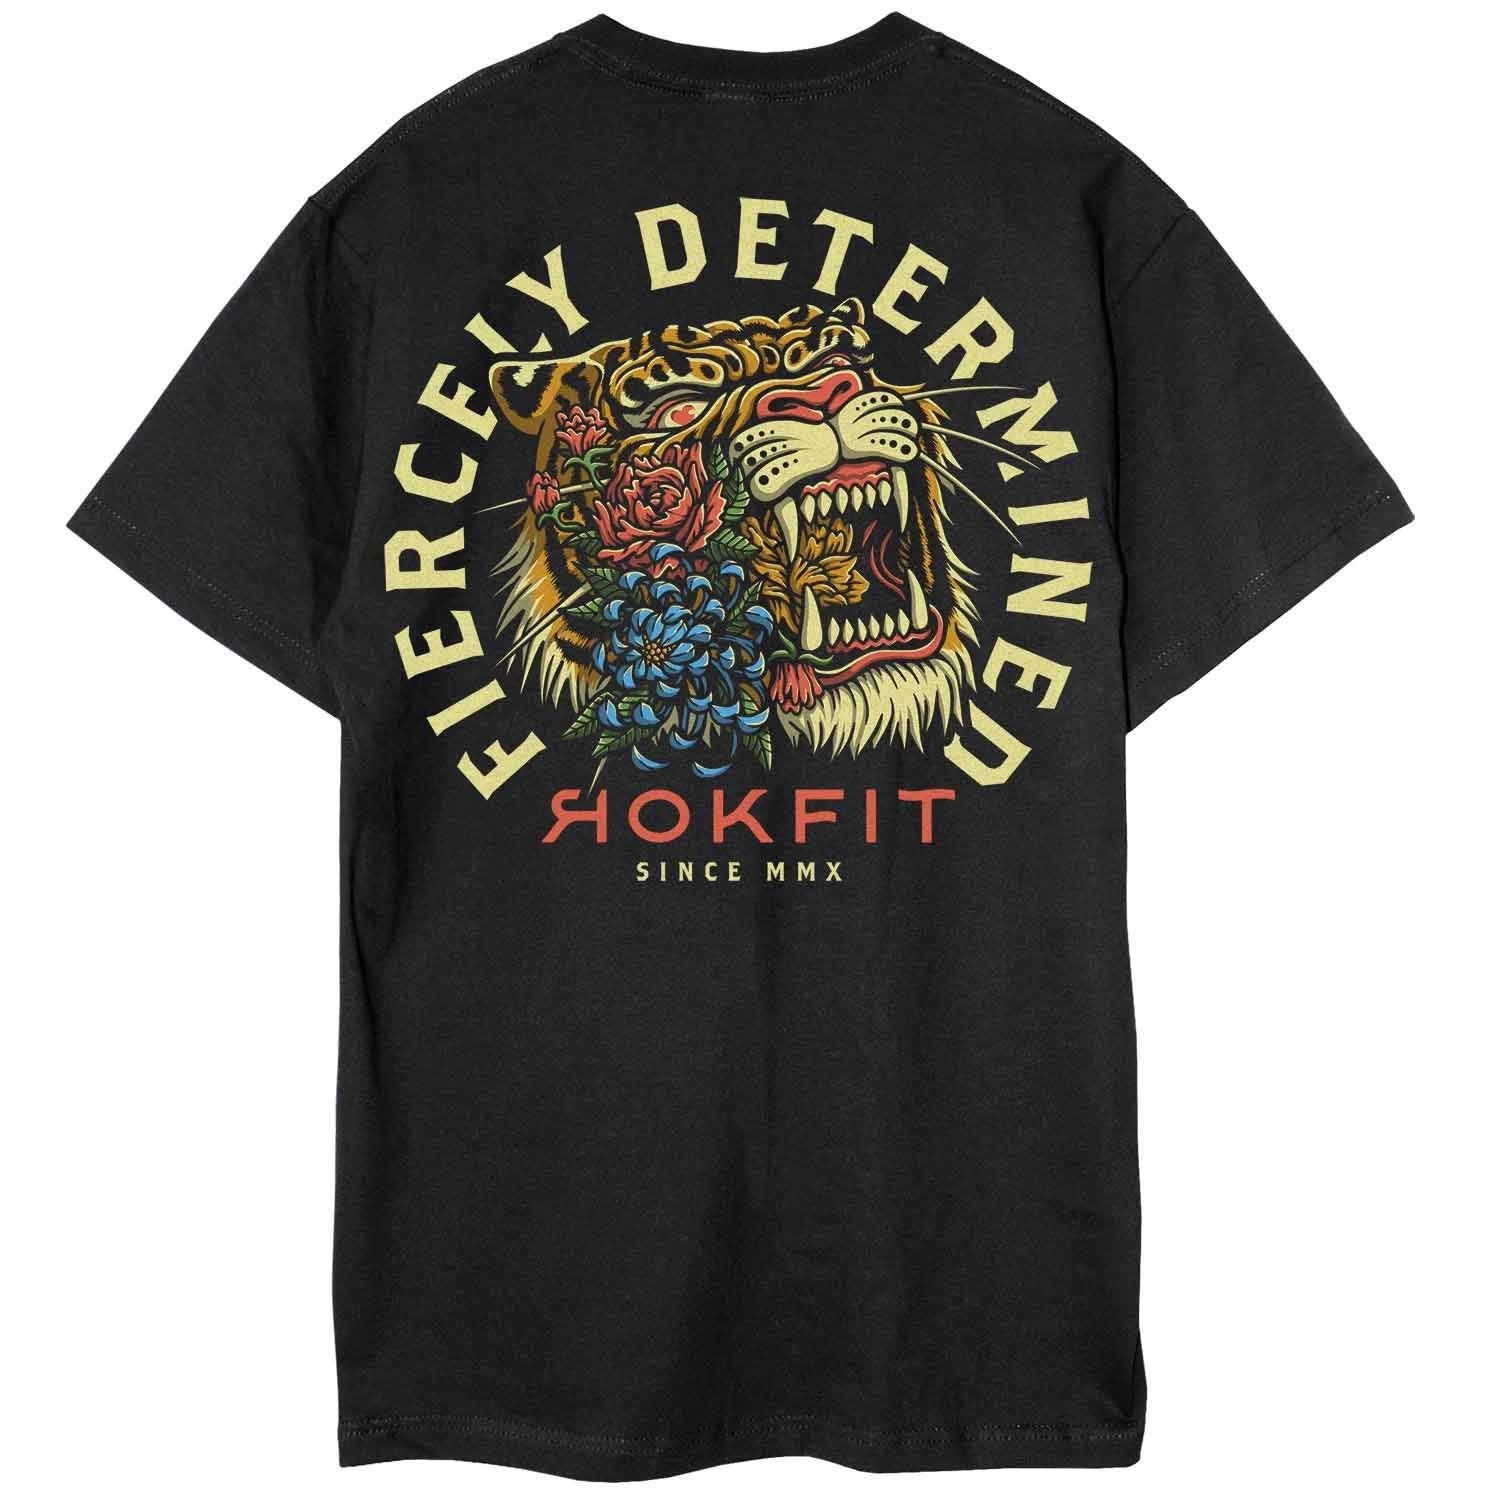 Fiercely Determined T-Shirt